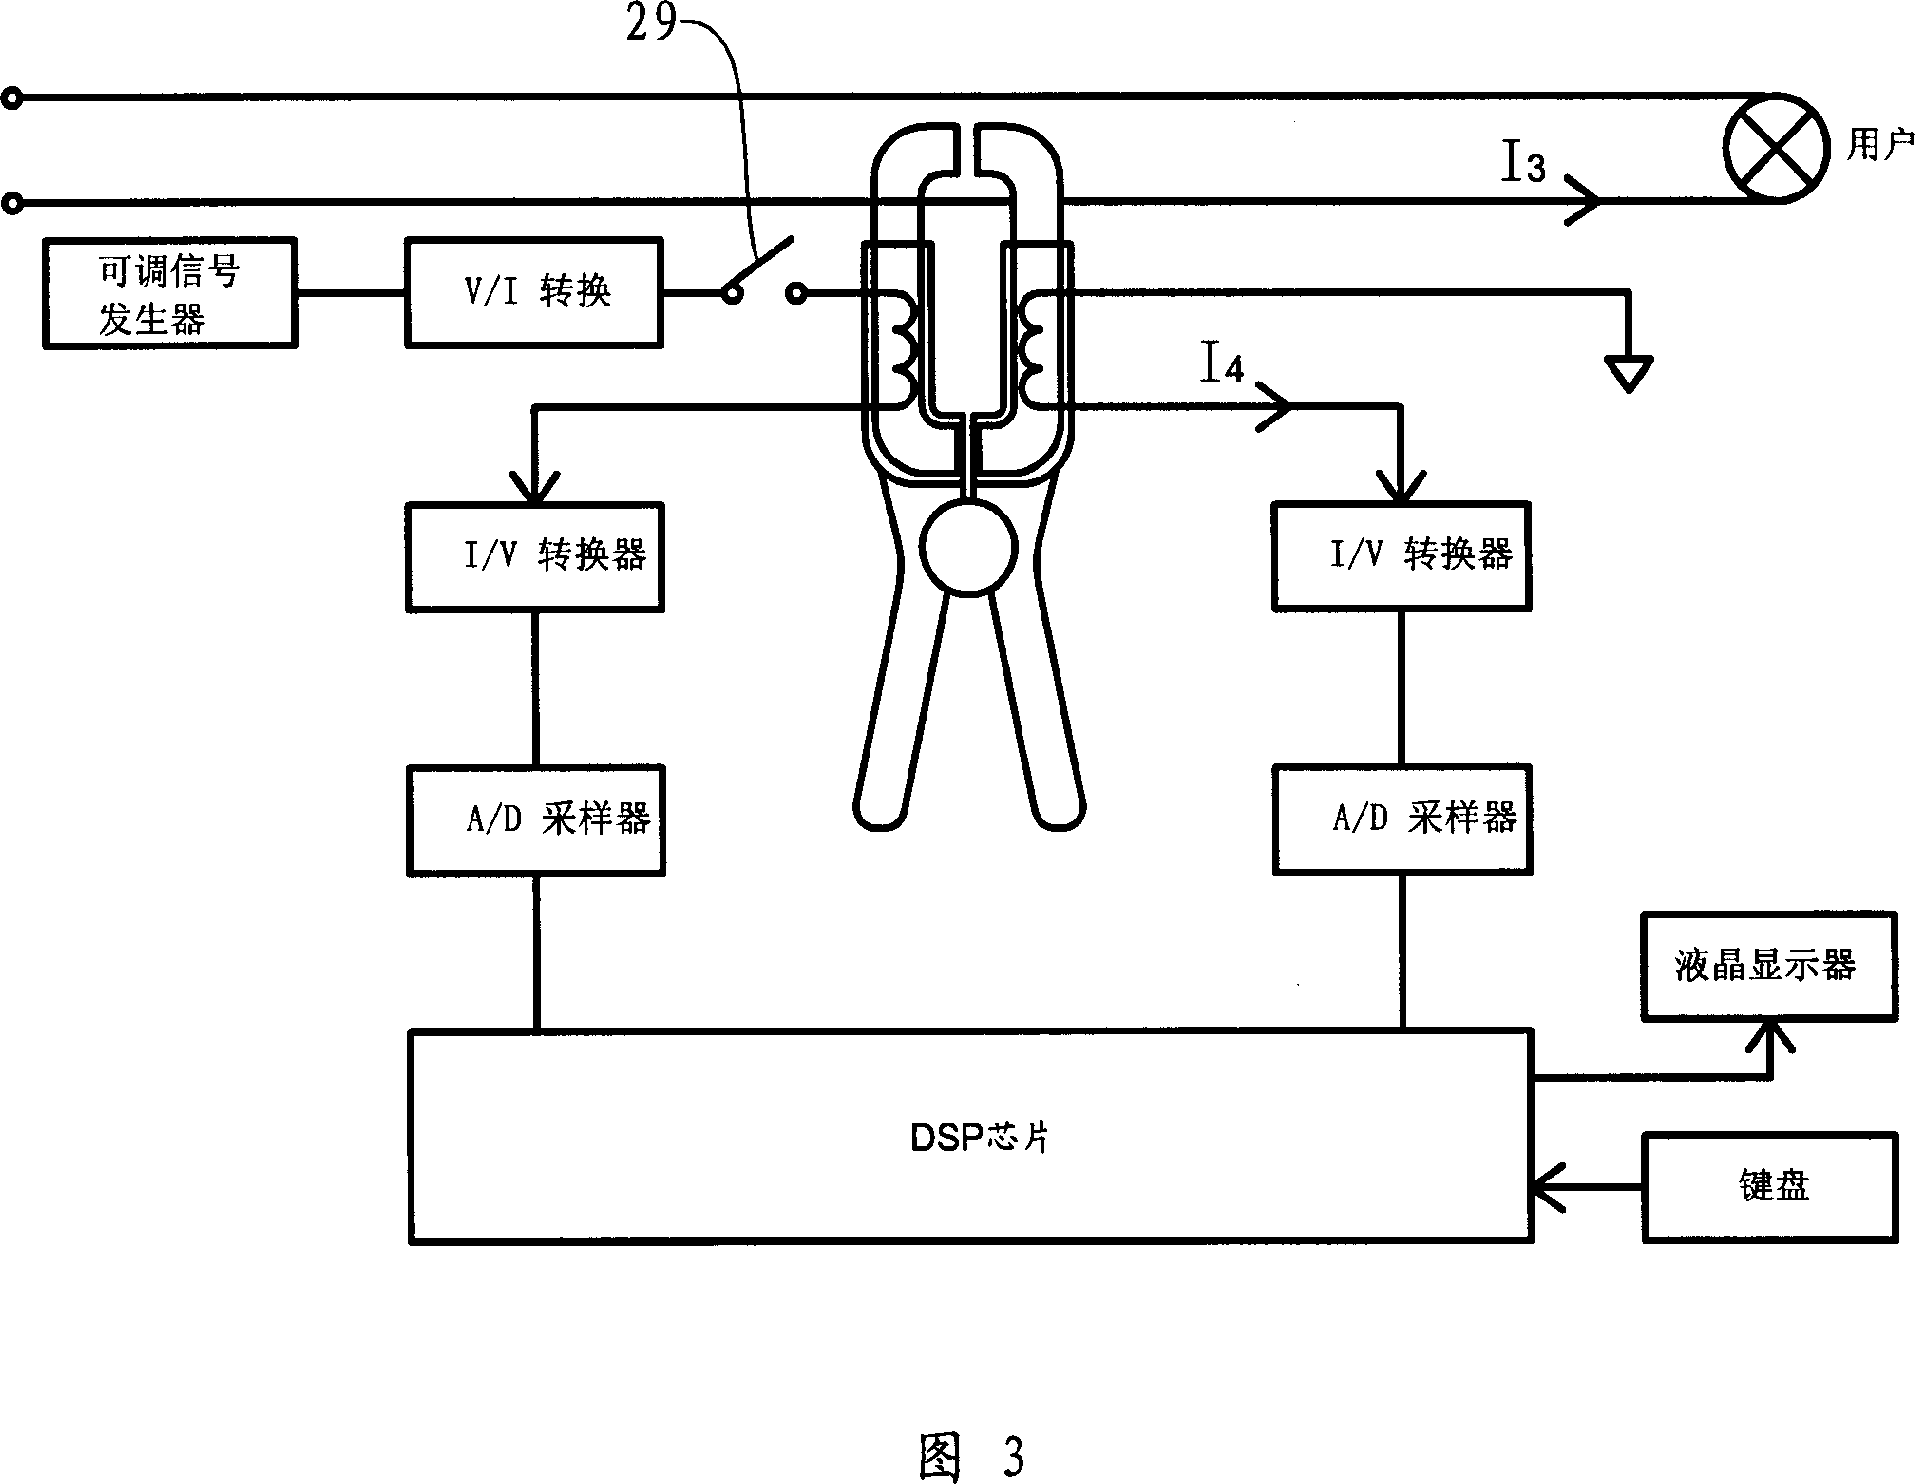 Forcipated mutual-inductor, forcipated ammeter and verification method of forcipated ammeter